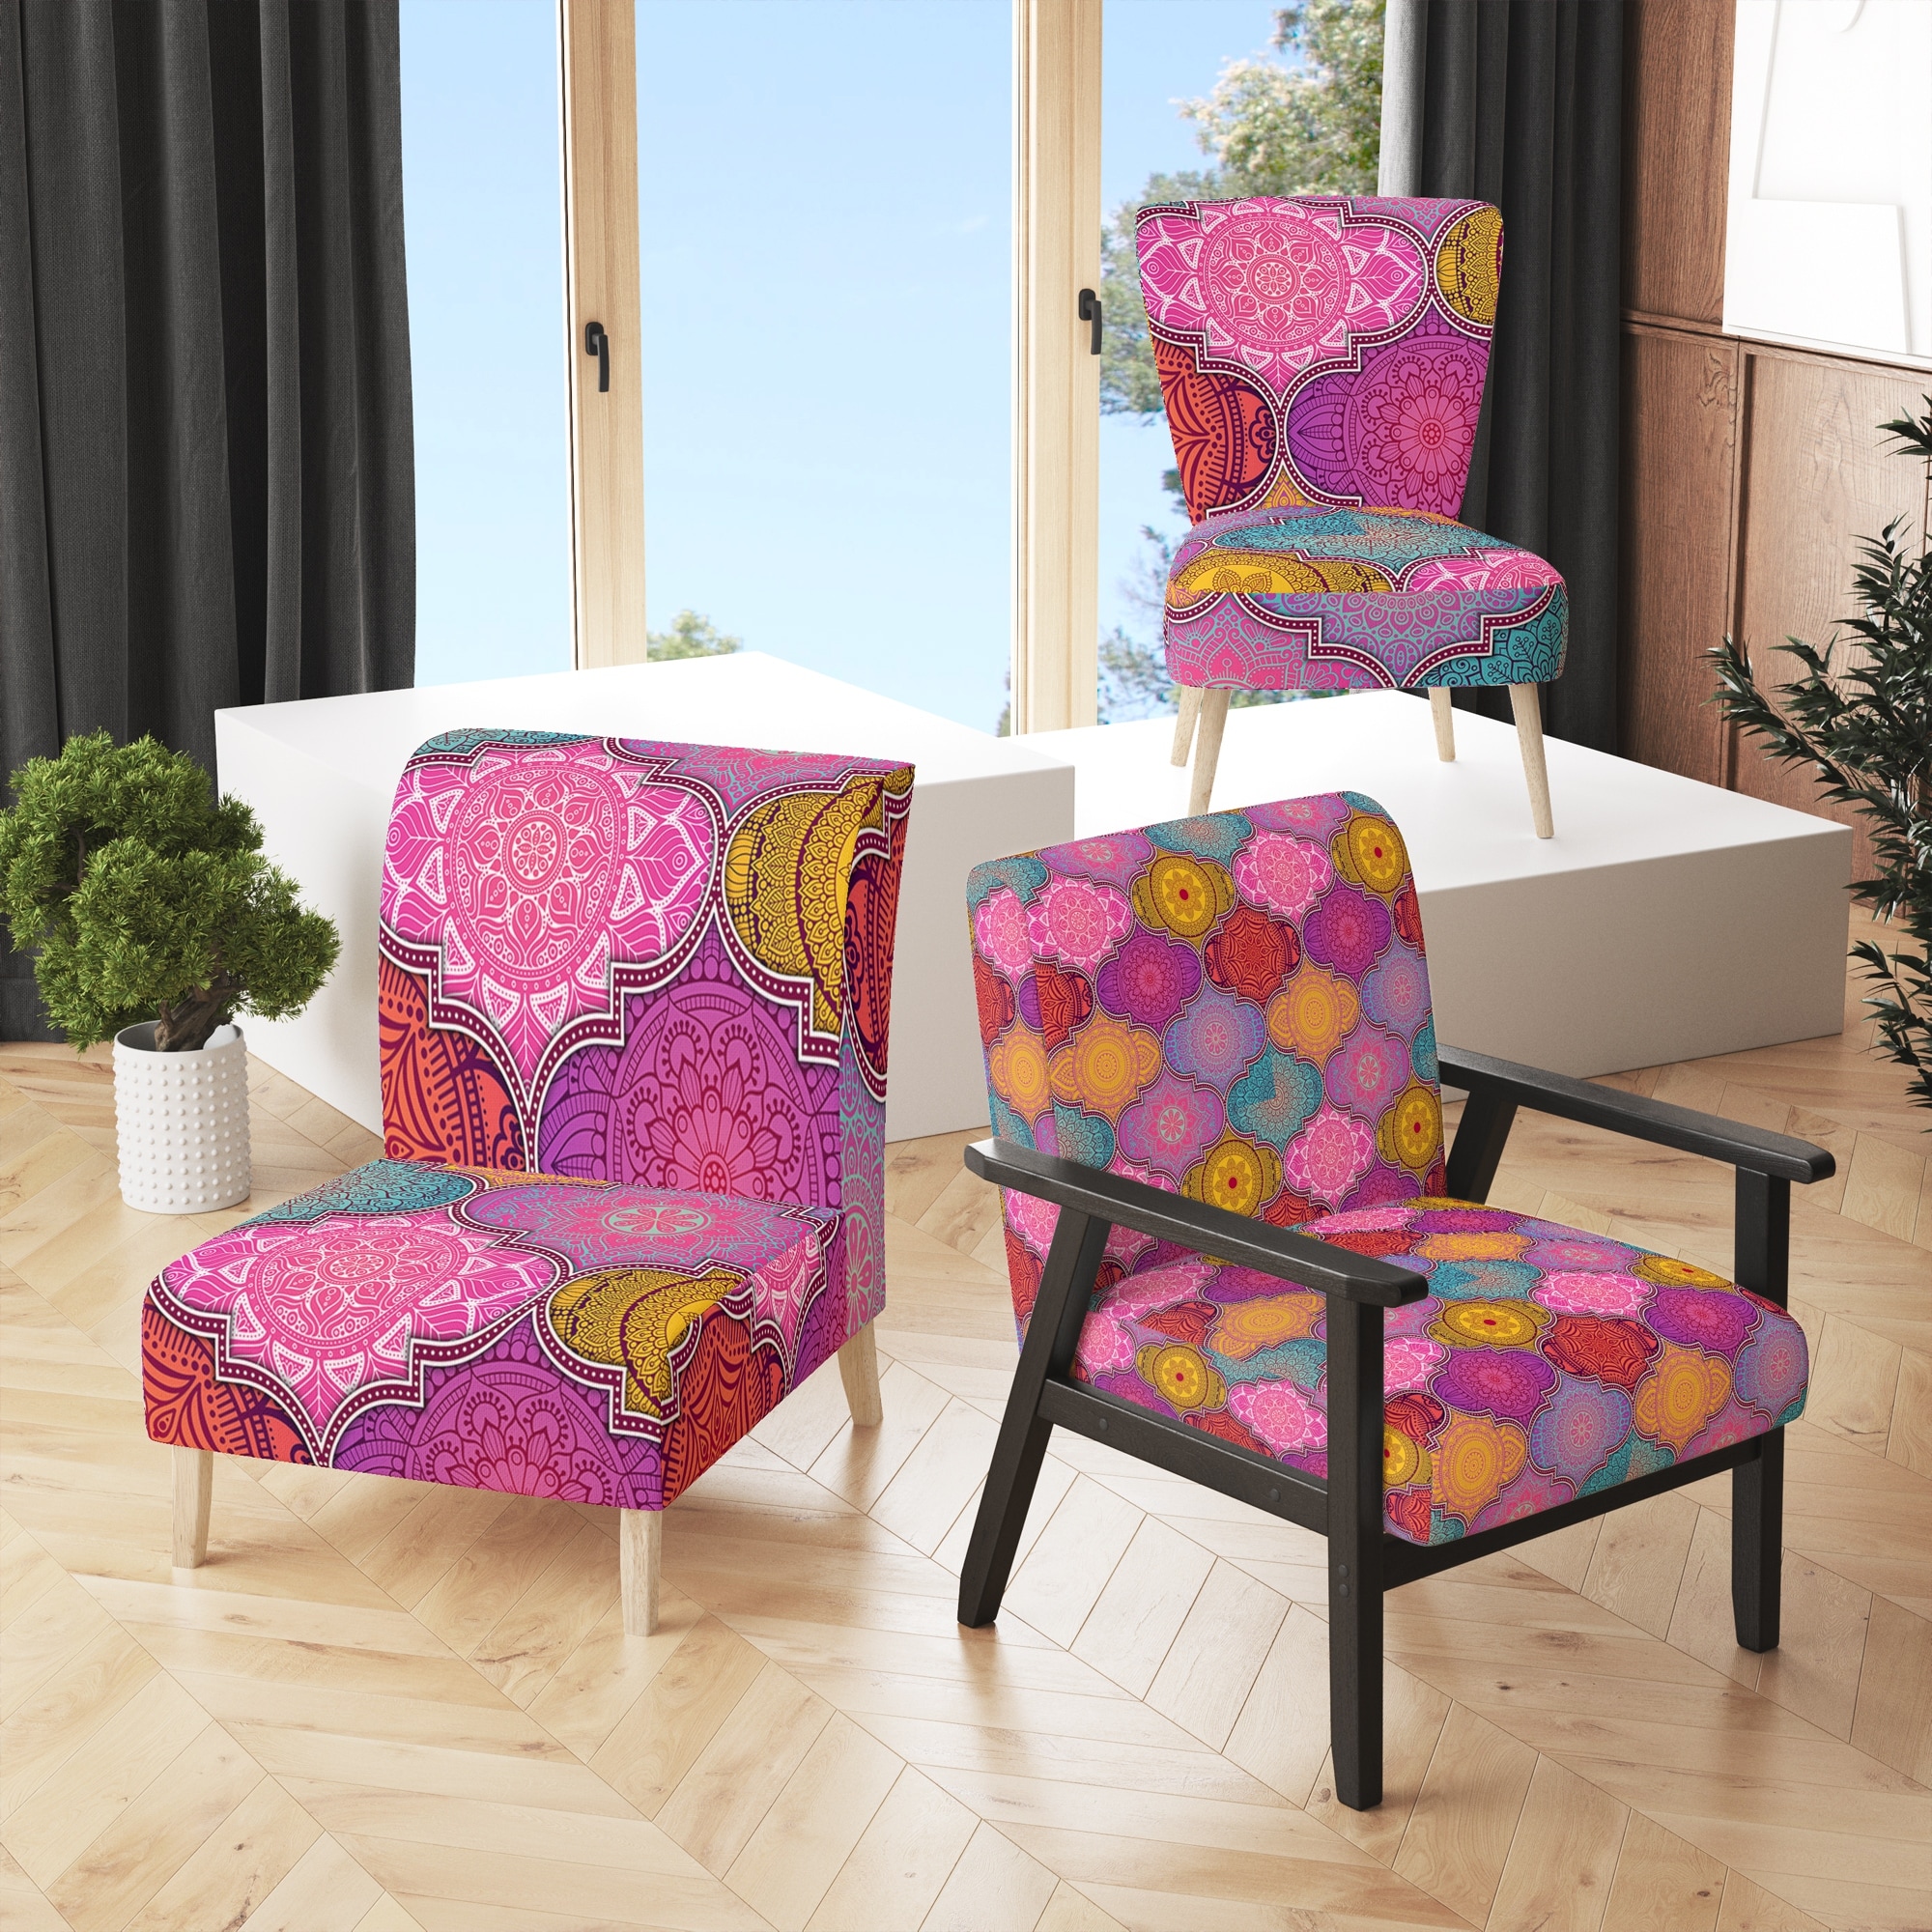 Designart Multicolor Ethnic Patchwork Upholstered Patterned Accent Chair  and Arm Chair